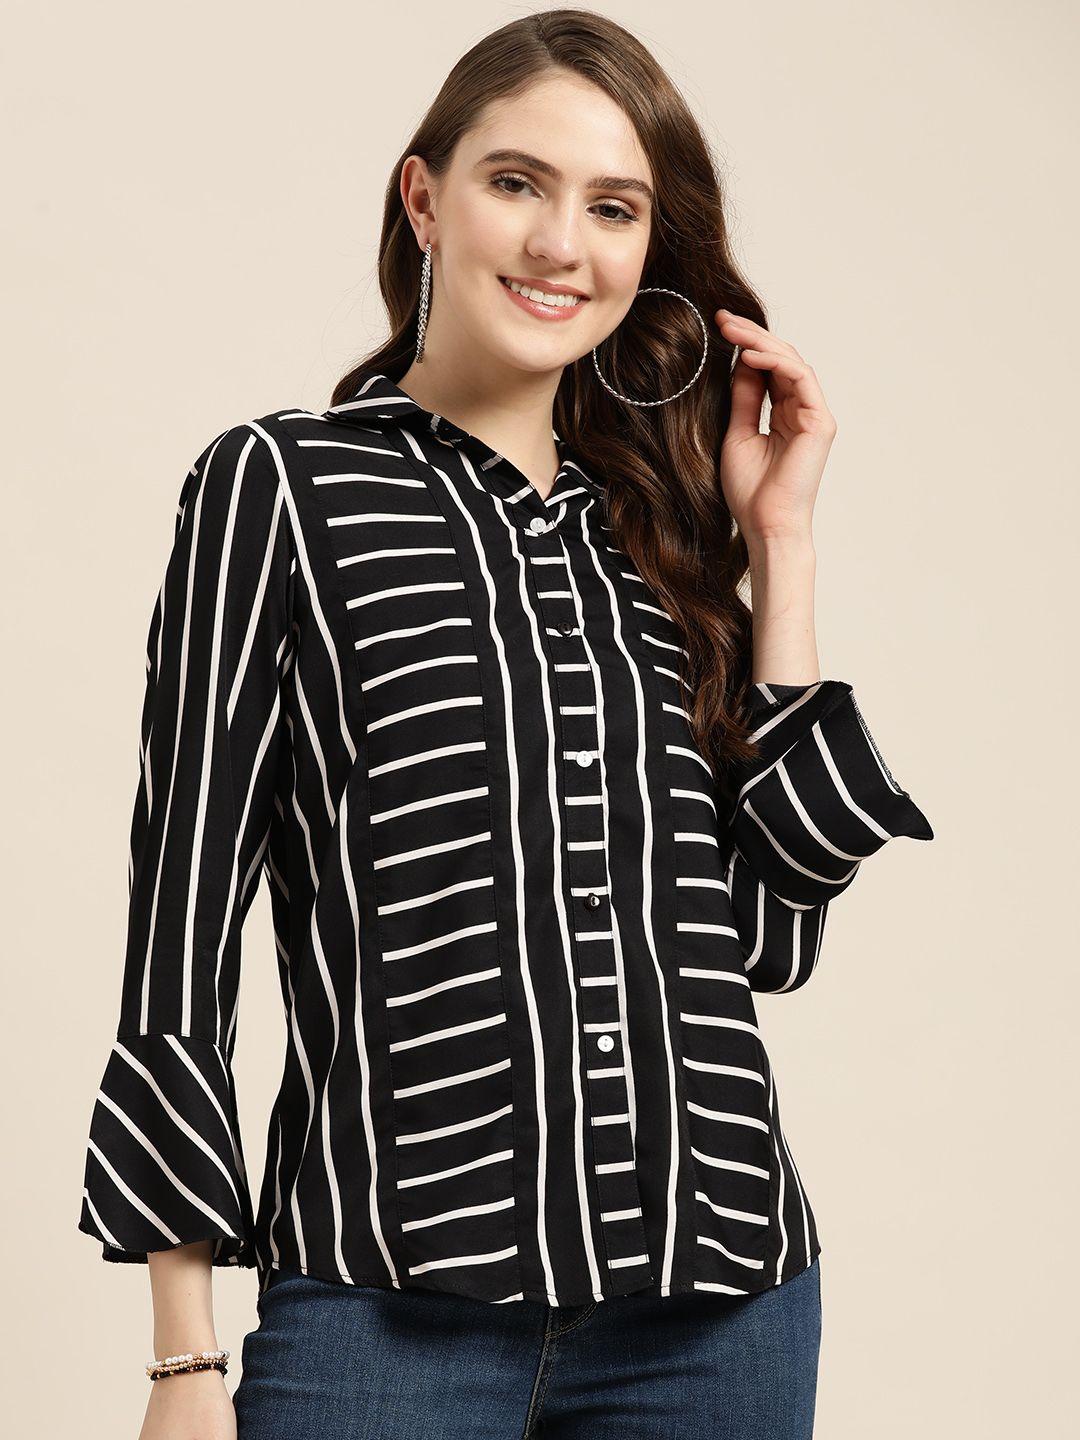 qurvii women comfort striped bell sleeves casual shirt